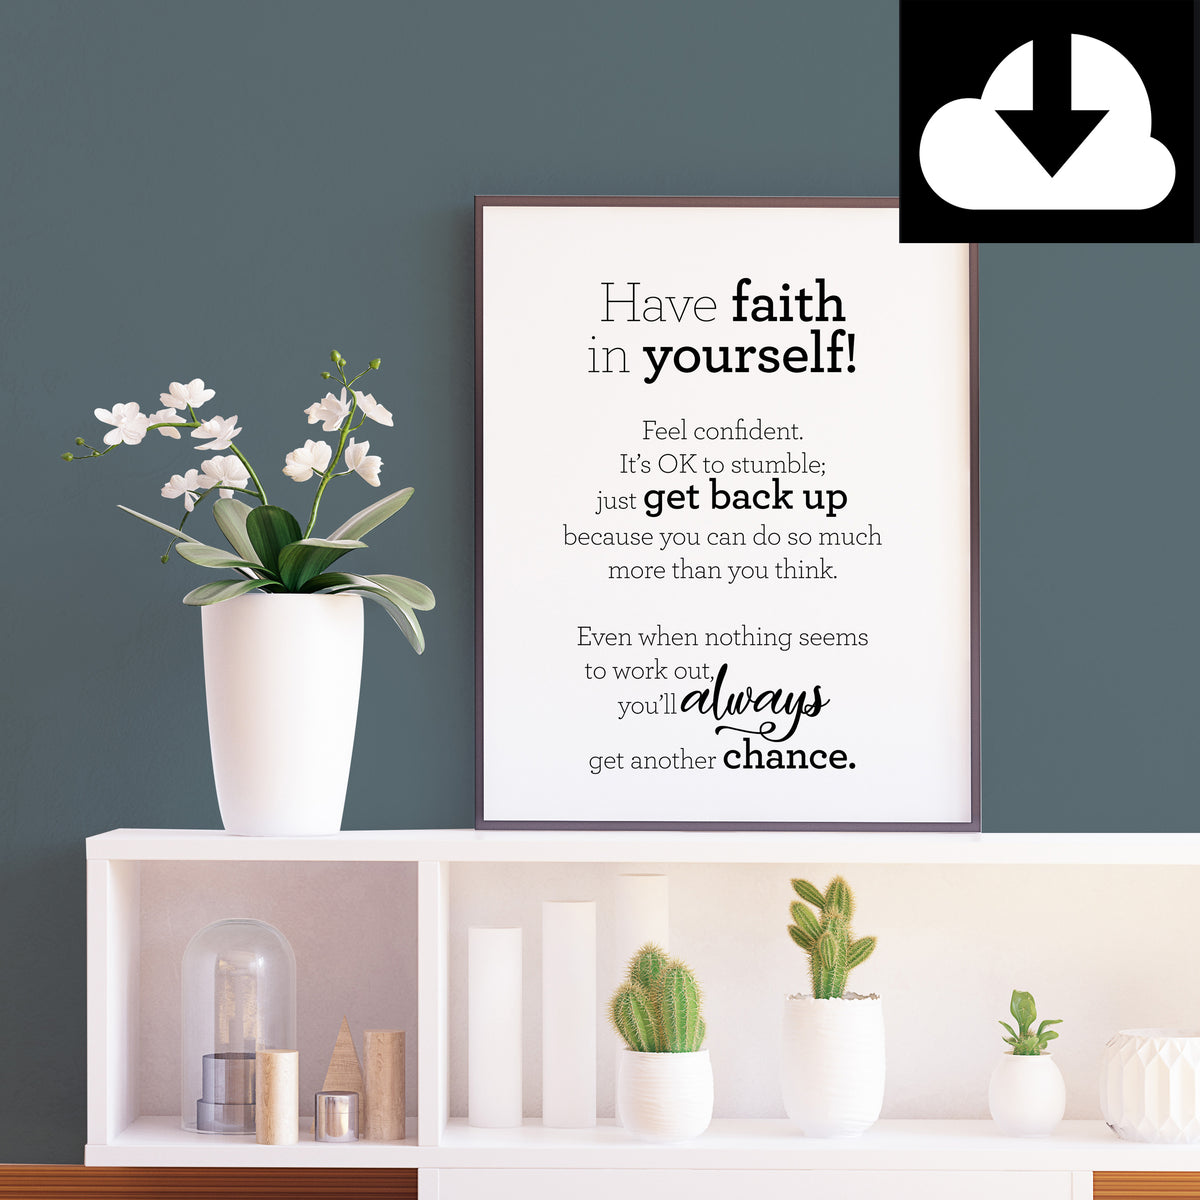 Have Faith in Yourself! - Text Print - Digital Download - Icelandic Scandinavian Nordic - Black & White - Minimal Typographic Wall Art